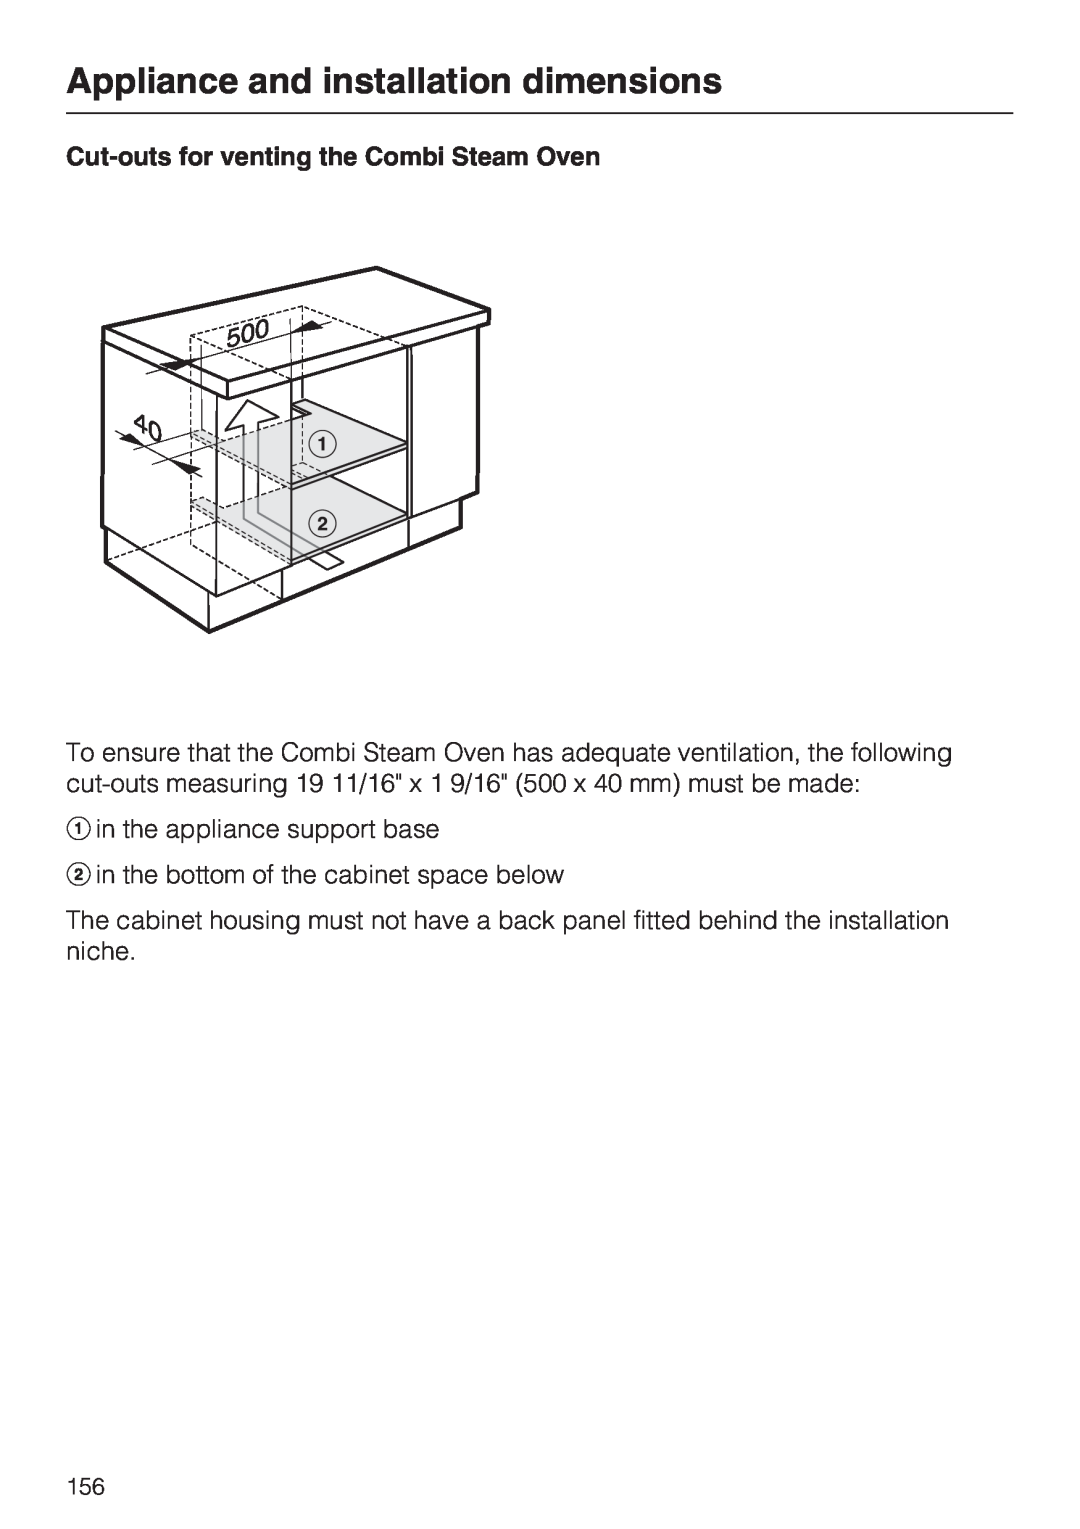 Miele 09 855 050 installation instructions Appliance and installation dimensions, in the appliance support base 